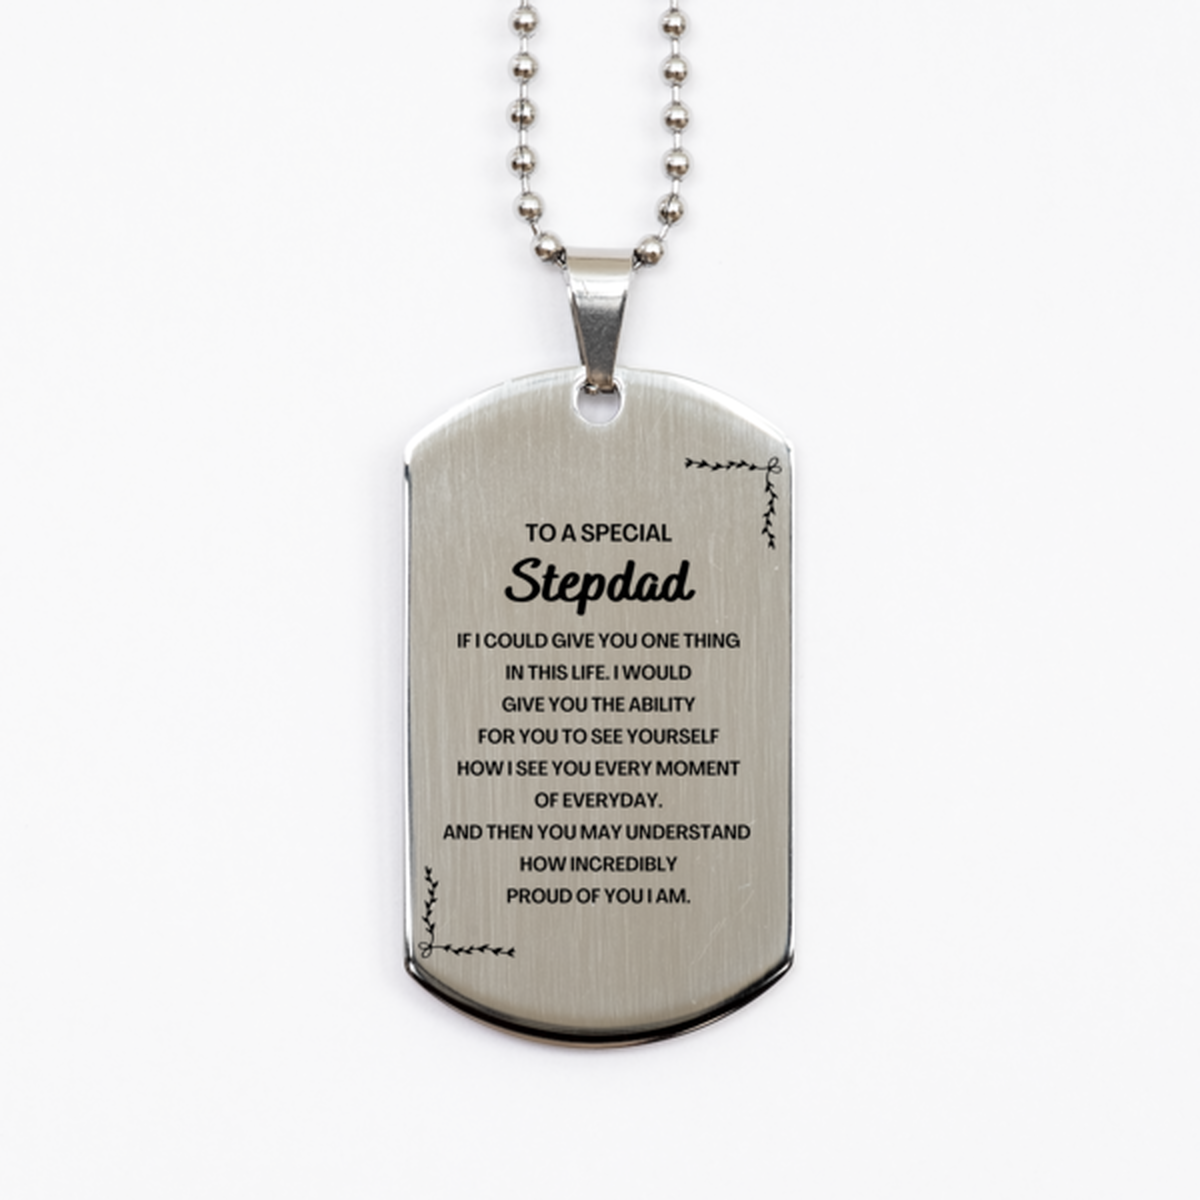 To My Stepdad Silver Dog Tag, Gifts For Stepdad Engraved, Inspirational Gifts for Christmas Birthday, Epic Gifts for Stepdad To A Special Stepdad how incredibly proud of you I am